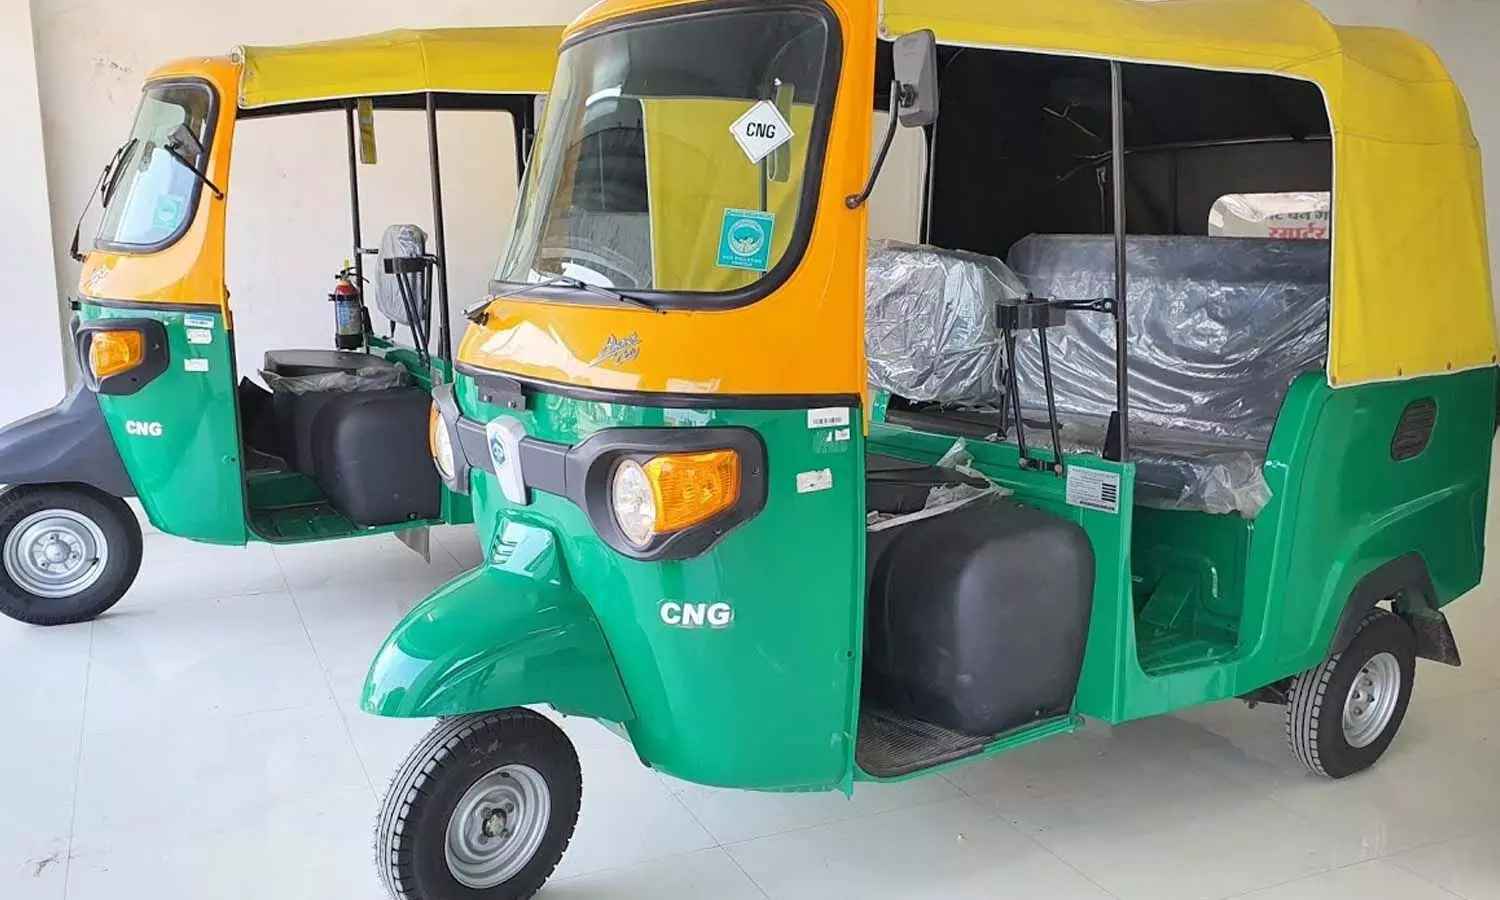 One thousand CNG tempos will be converted into auto rickshaws, approval for replacement